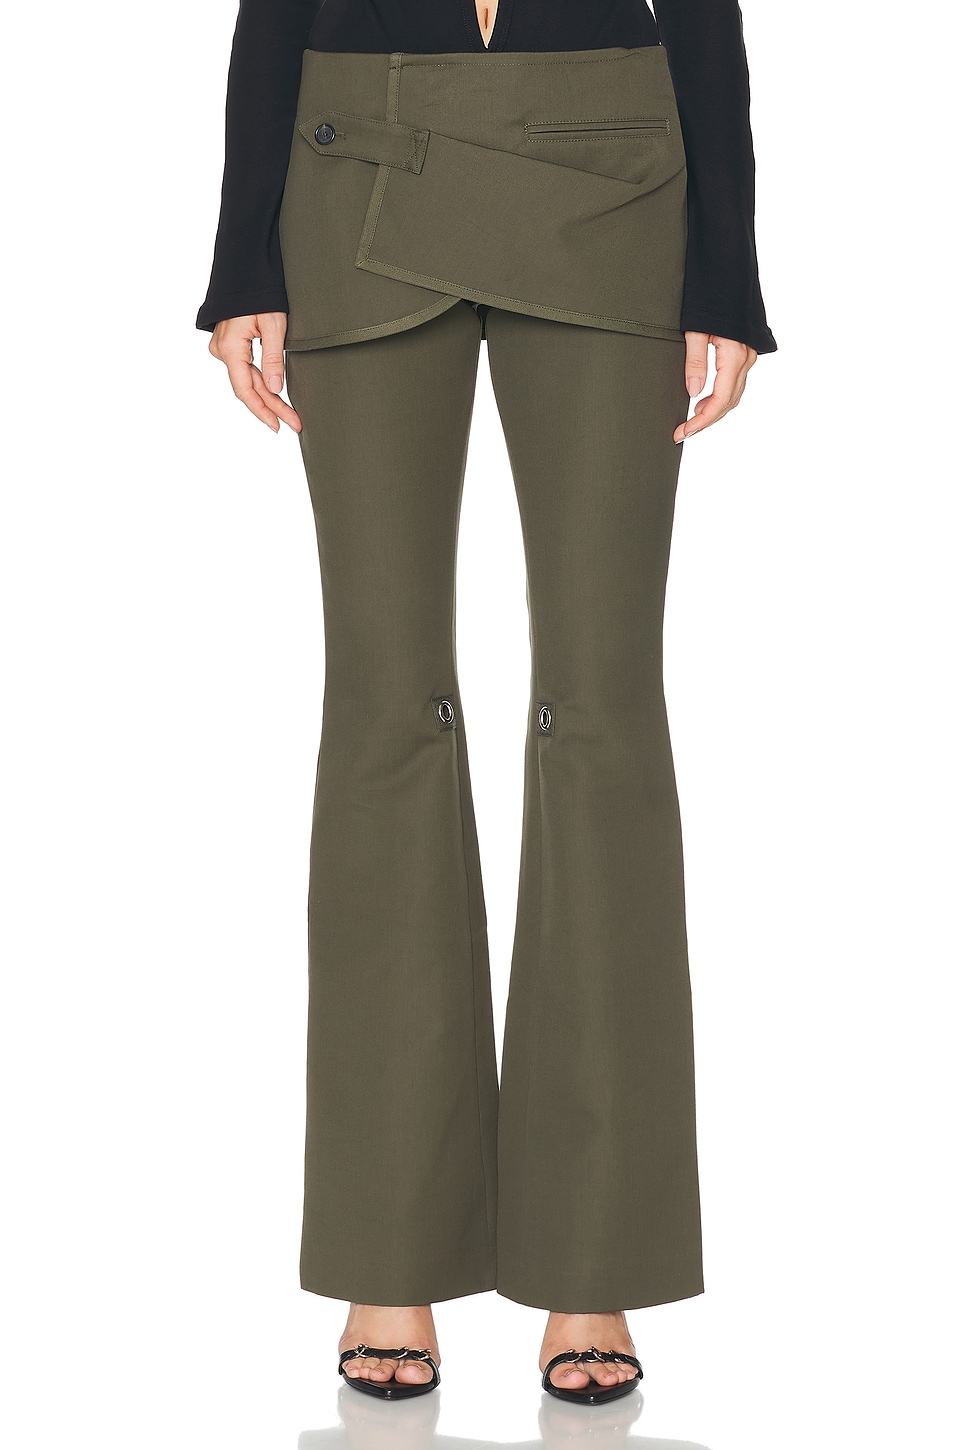 Image 1 of Courreges Modular Overskirt Cotton Bootcut Pant in Camouflage Green